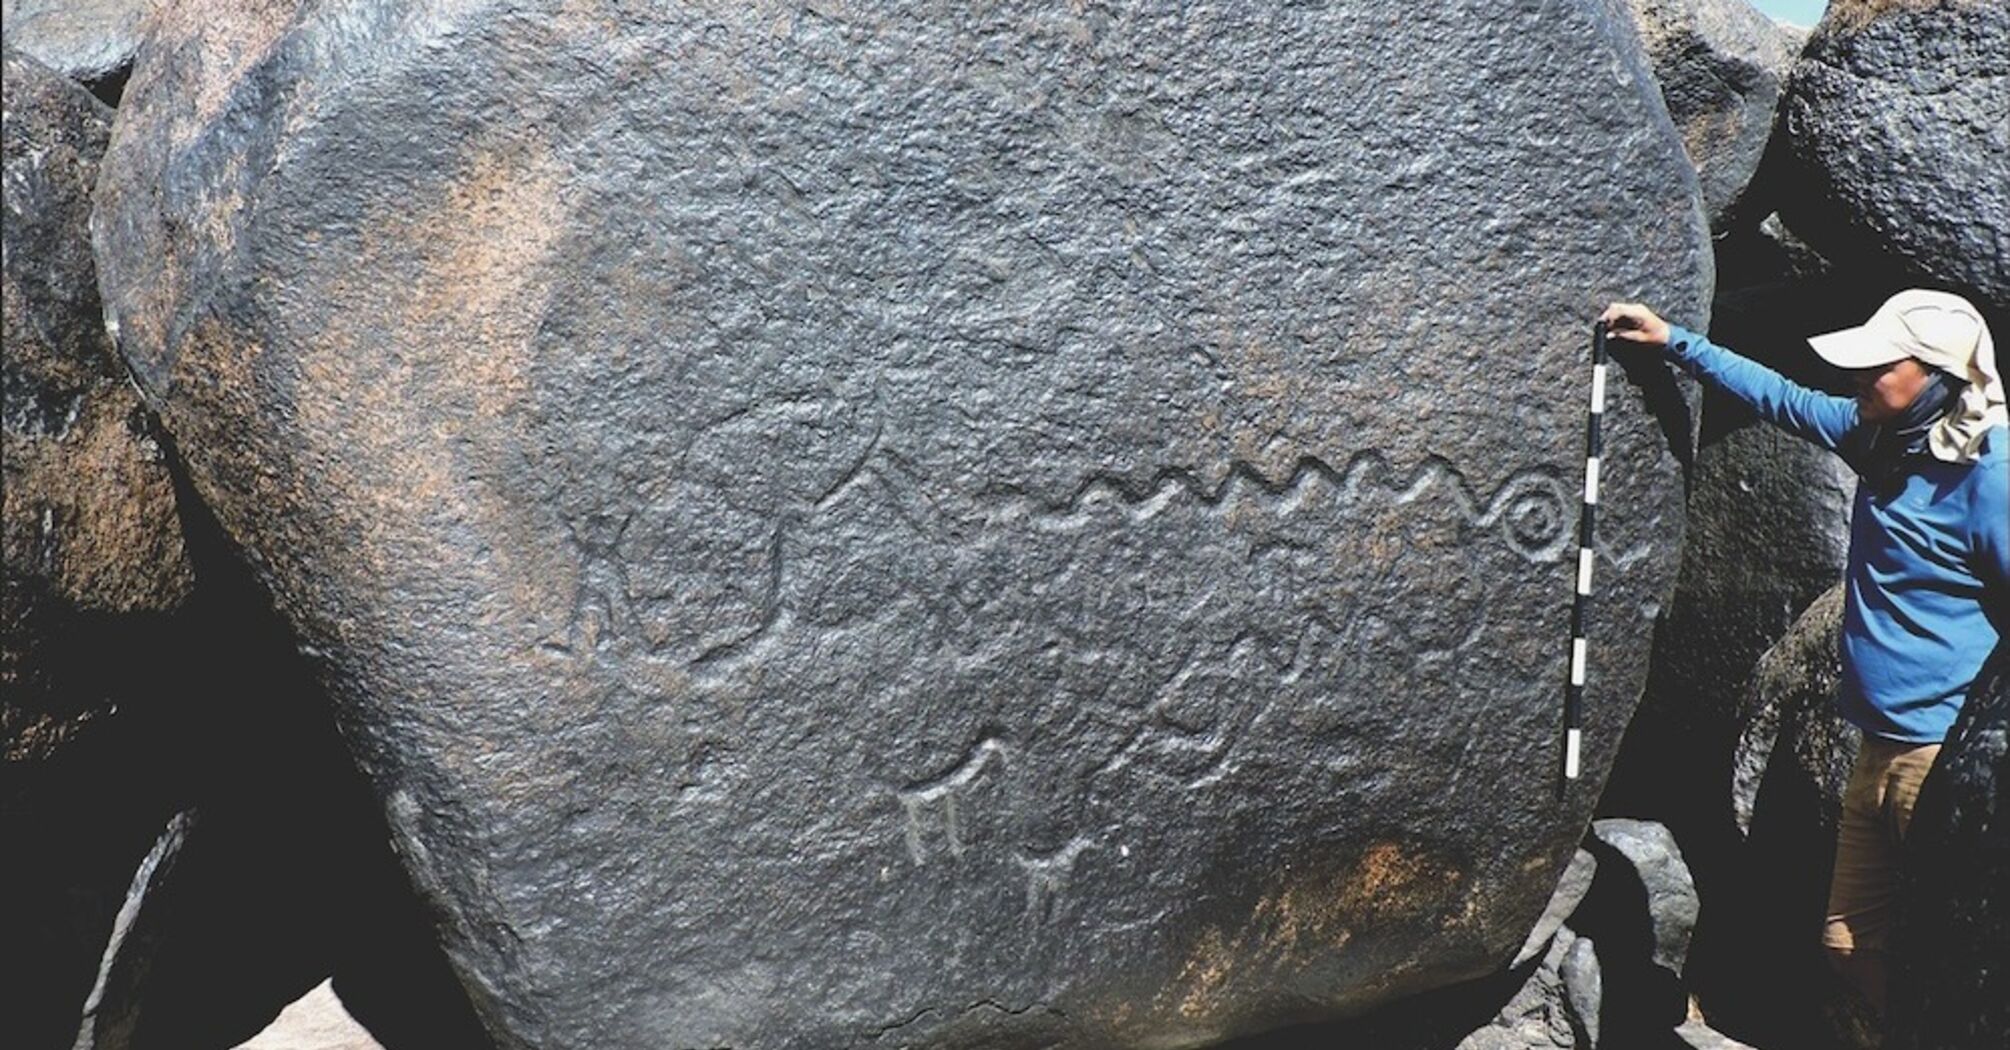 2,000-year-old rock art with nearly 140-foot-long snake found along the Colombia-Venezuela Orinoco River